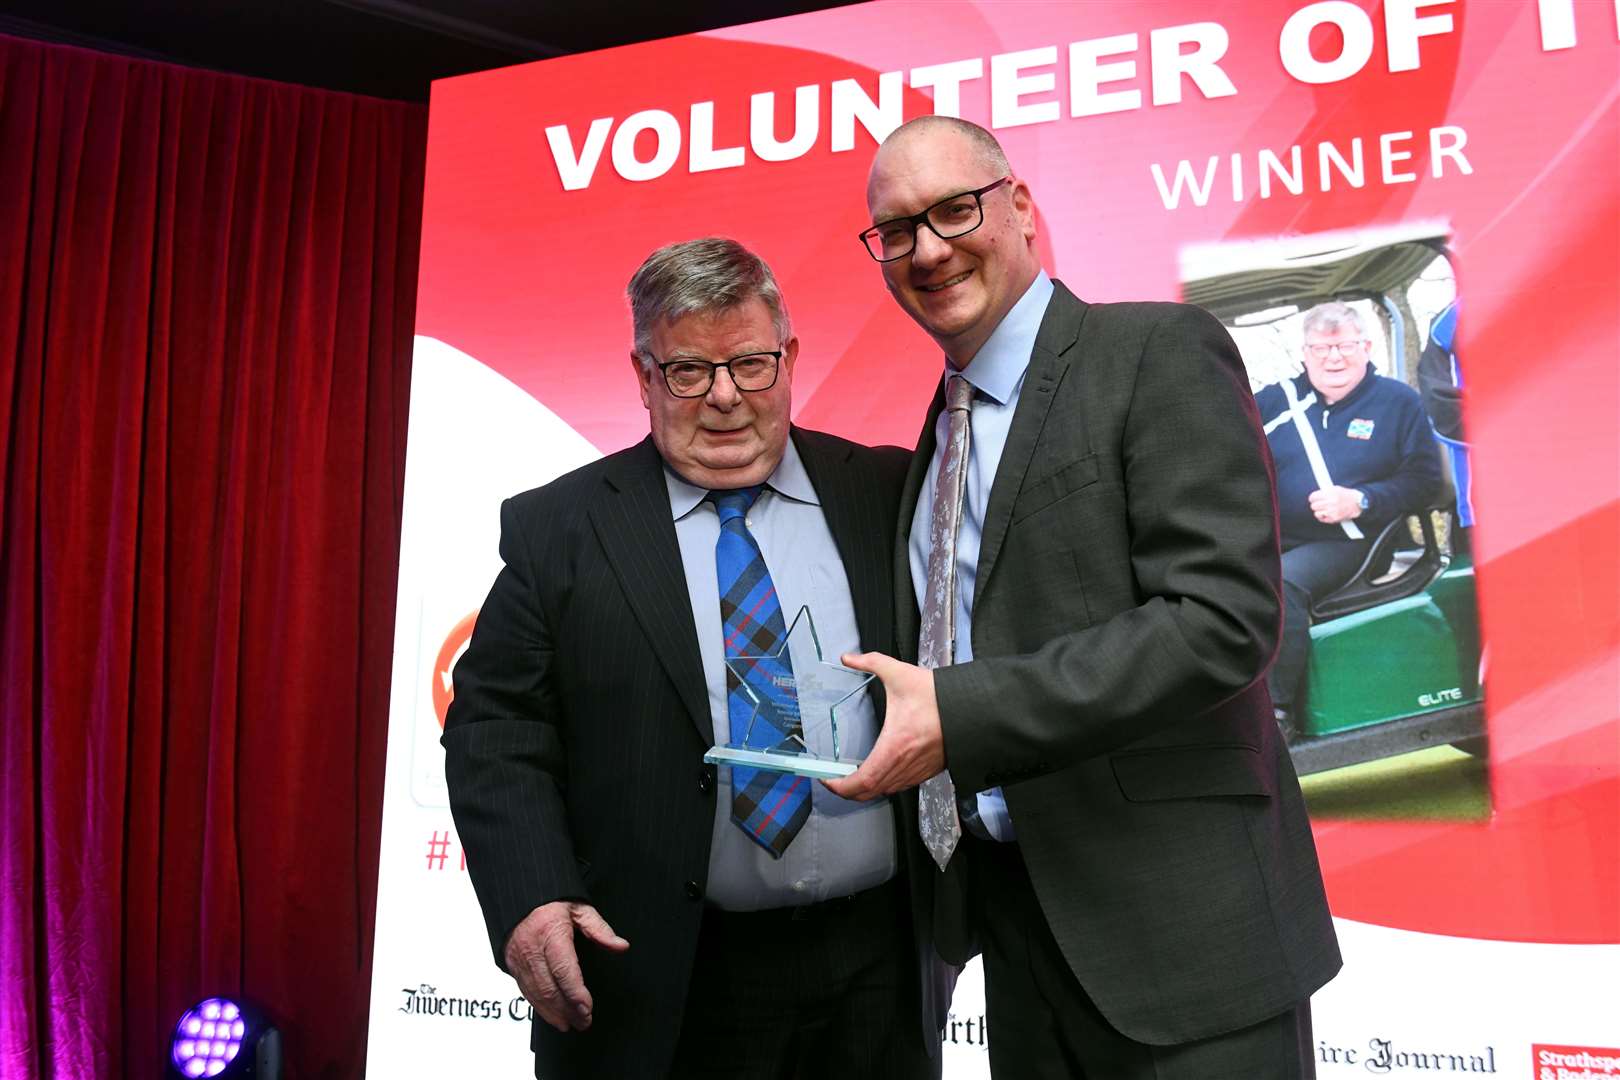 Ronnie Mitchell won the Volunteer Award. Award presented by Chris Dowling of Cairngorm Group. Picture: James Mackenzie.